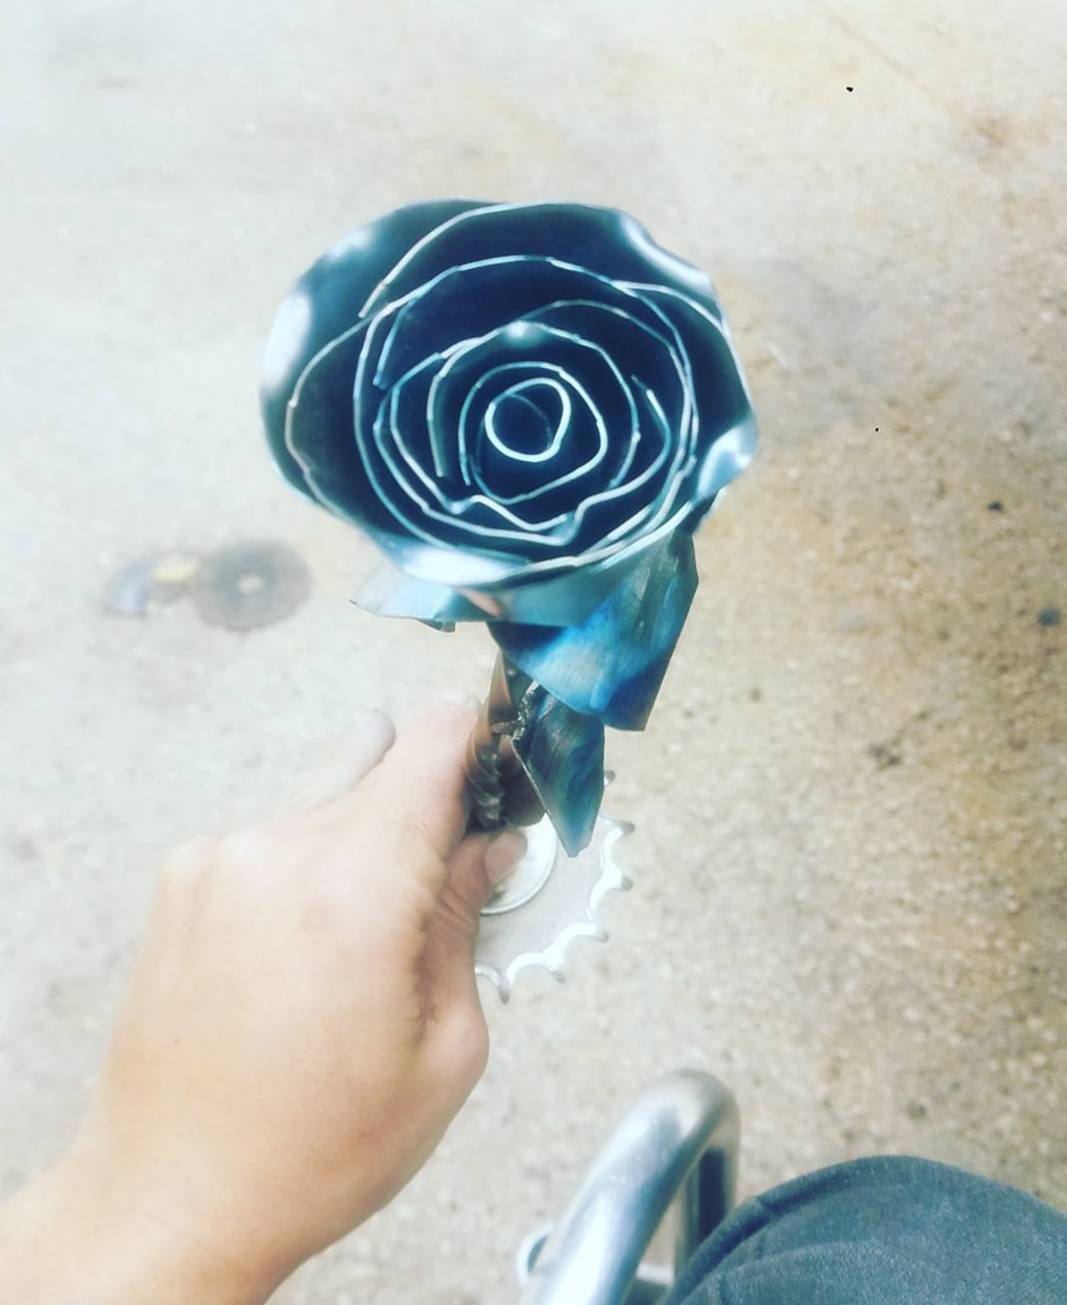 A beautiful metal rose made by Jerry Diaz